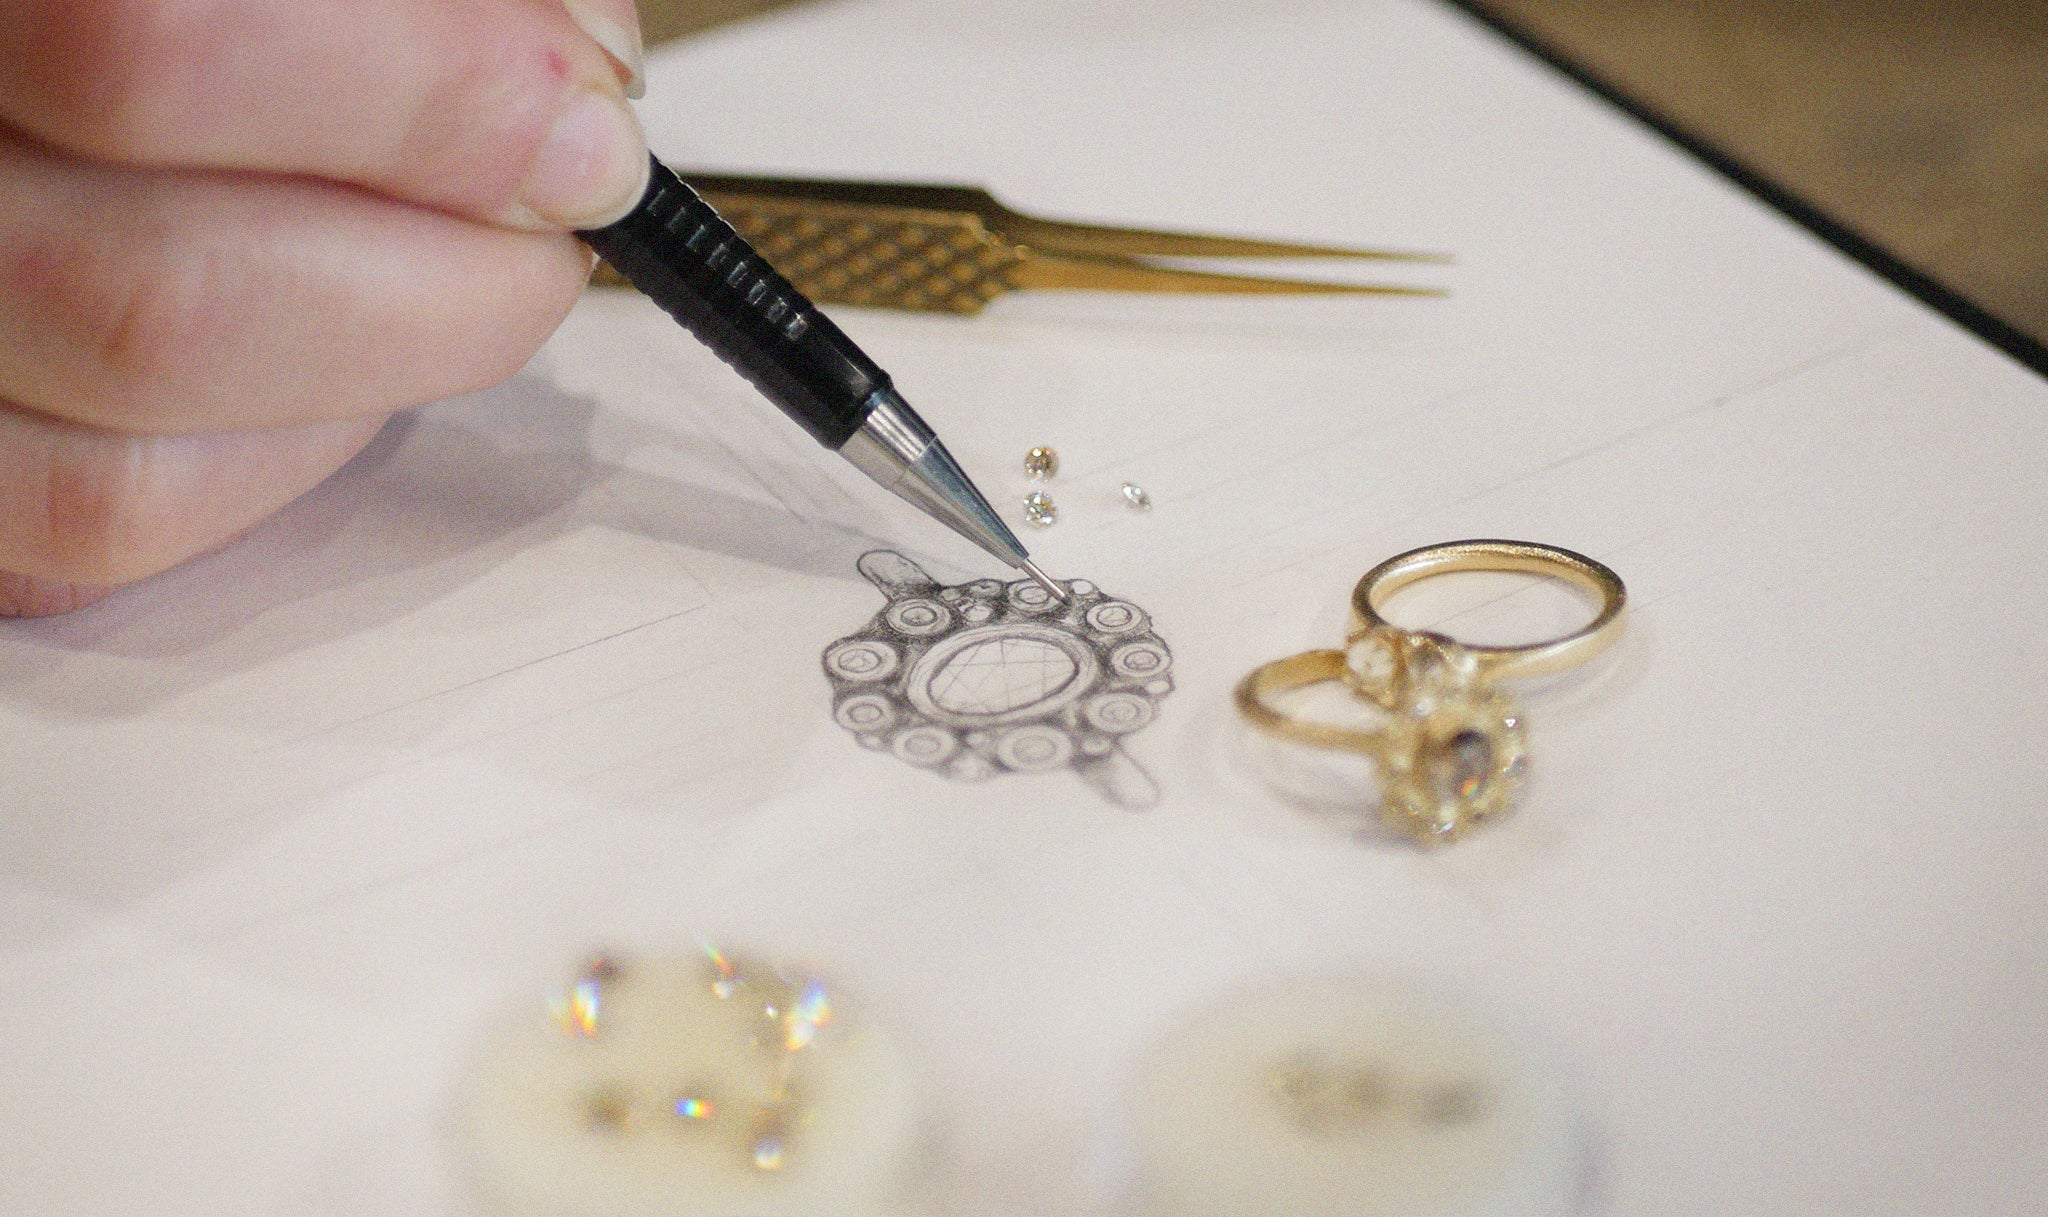 Crafting the Contemporary halo ring with brown rose cut diamonds collaboration Bespoke ring exhibition diana porter jewellery bristol